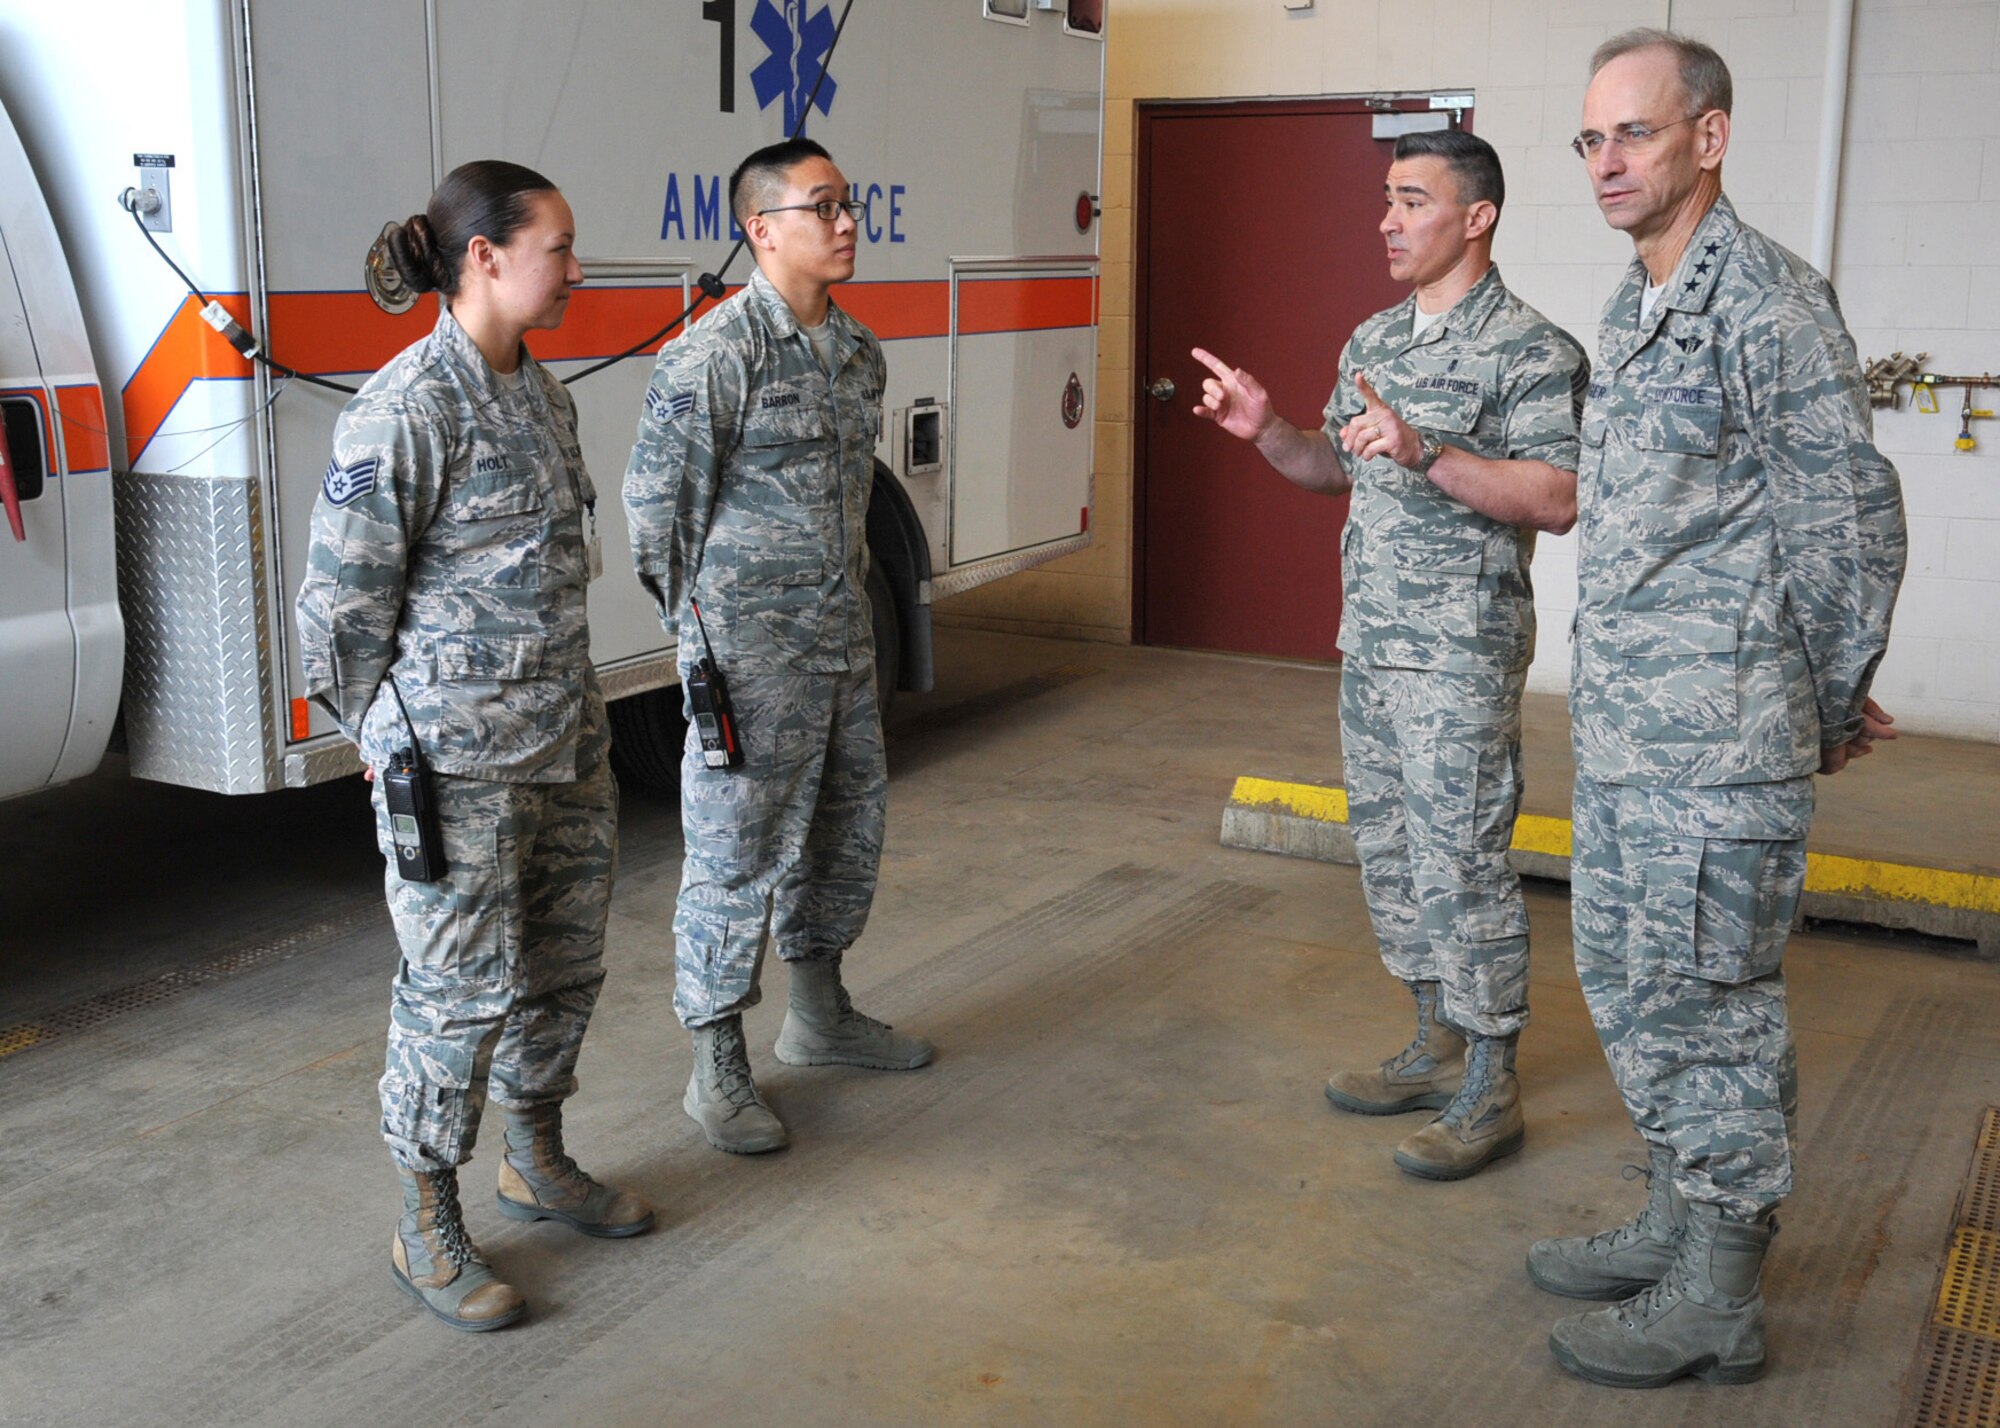 Air Force Surgeon General Lt. Gen. (Dr.)  Gen. Mark Ediger, right, and Chief Master Sgt. Jason Pace, middle, chief medical enlisted force and enlisted corps chief, speak with Airmen from the 319th Medical Group March 4, 2016, on Grand Forks Air Force Base, N.D. General Ediger and Chief Pace received a tour of the medical facilities and recognized the many 2015 award winners from the 319th Medical Group. (U.S. Air Force photo by Airman 1st Class Ryan Sparks/Released)